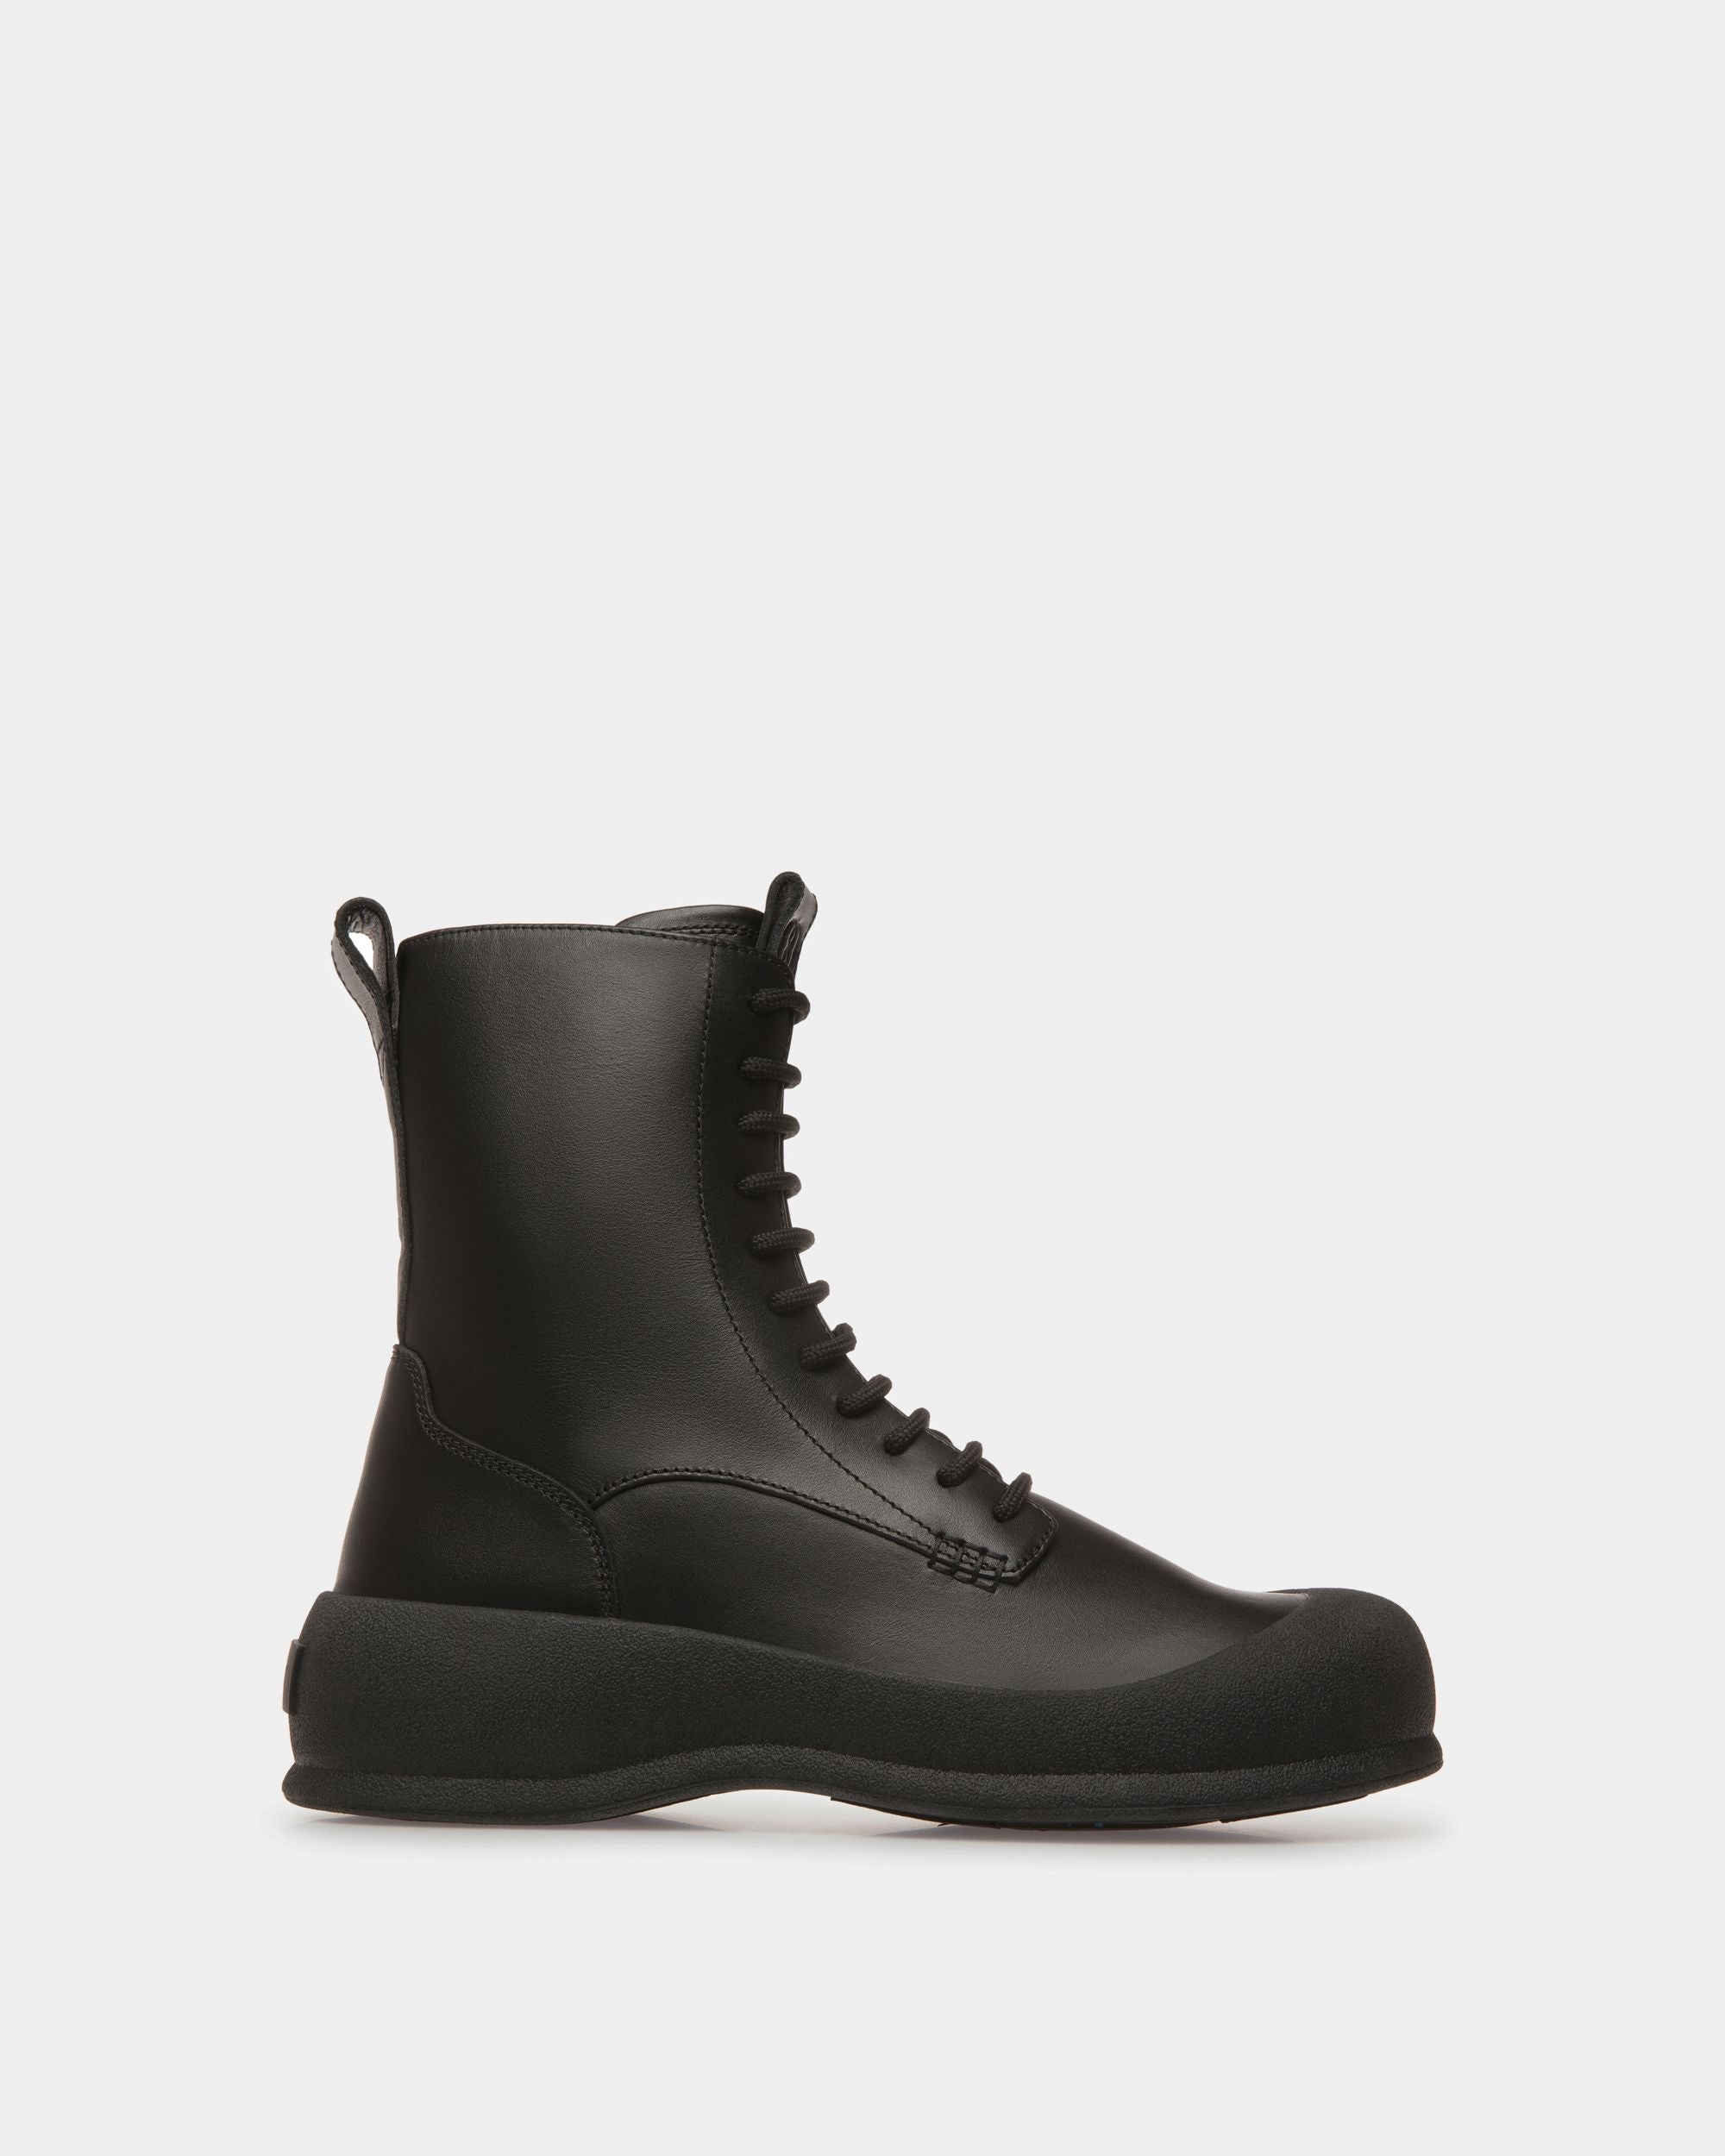 Courma | Women's Boots | Black Leather | Bally | Still Life Side